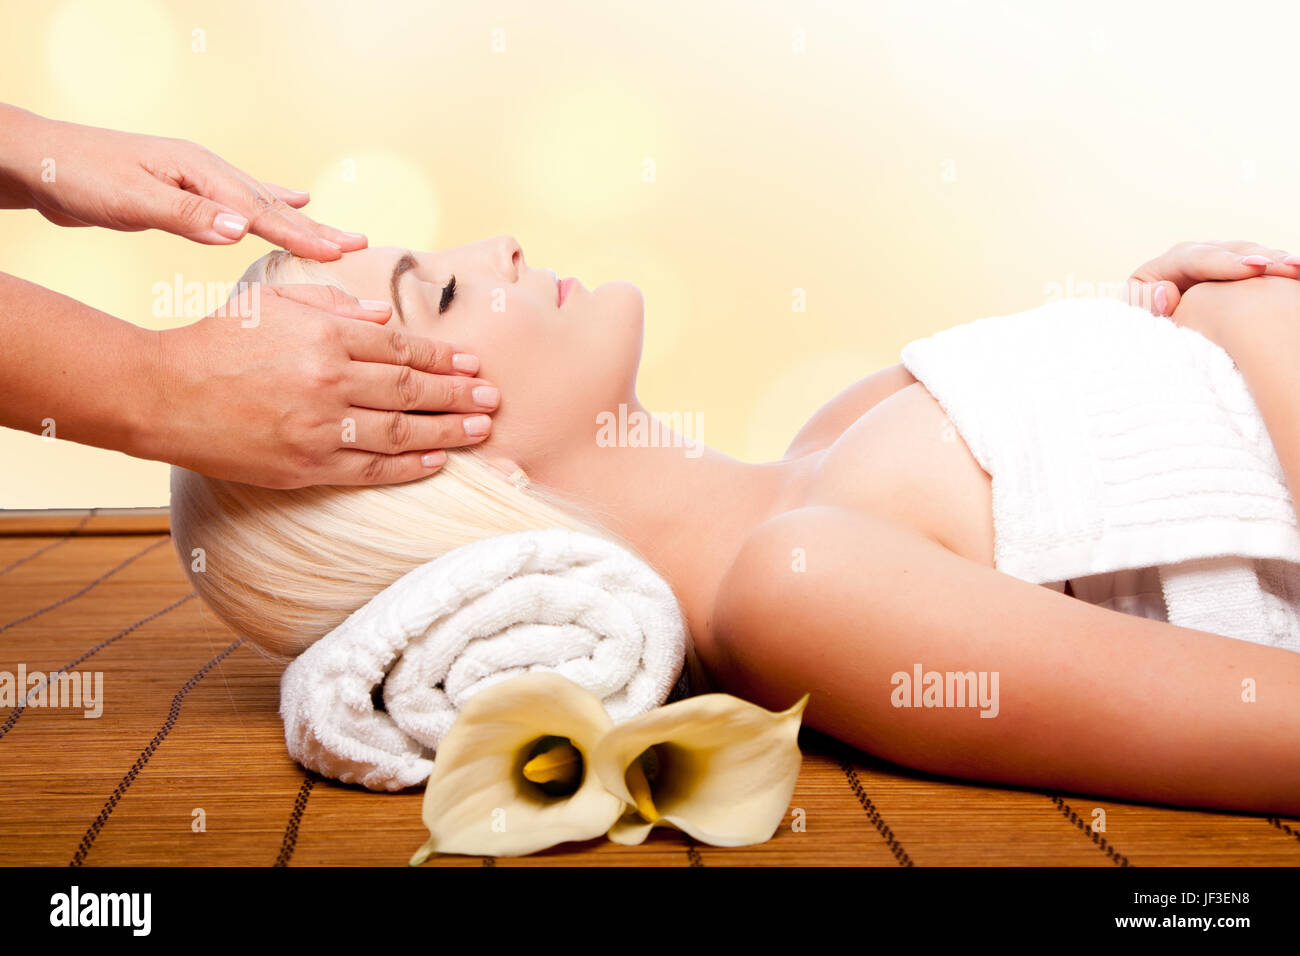 Relaxation pampering massage spa Stock Photo